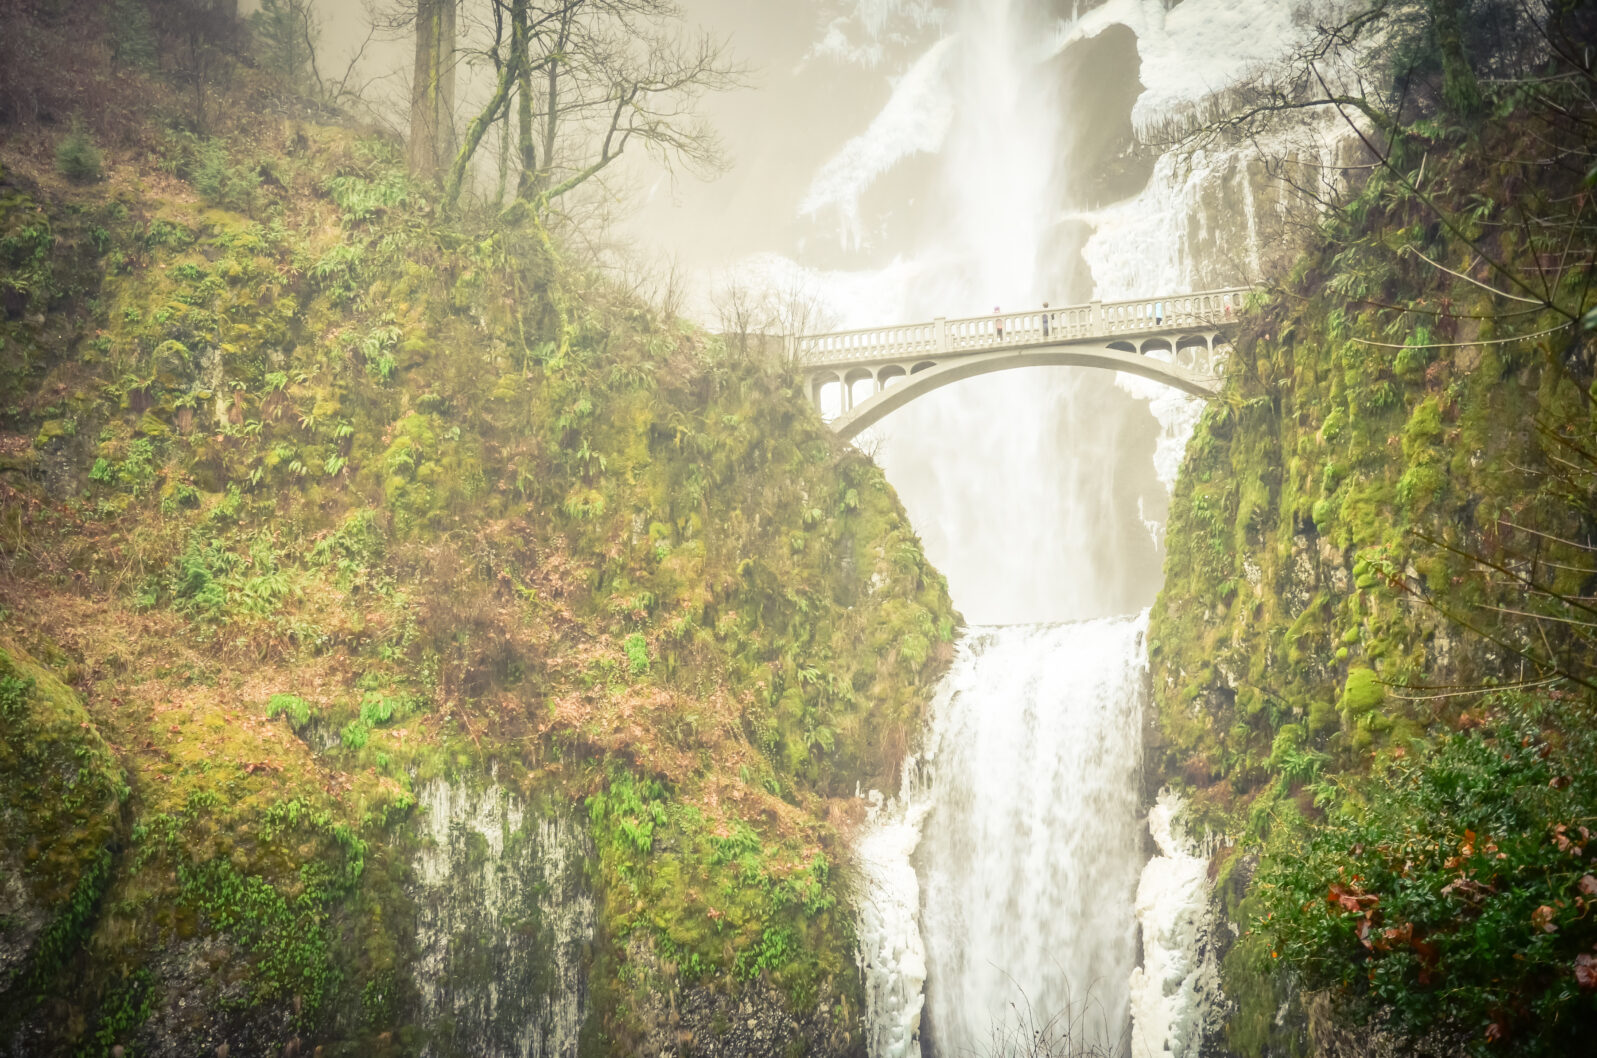 Vintage tone beautiful pedestrian stone bridge and knee-wobbling vantage point over the second tier 69-foot drop of Multnomah Falls lower in winter time. Natural and seasonal waterfall background